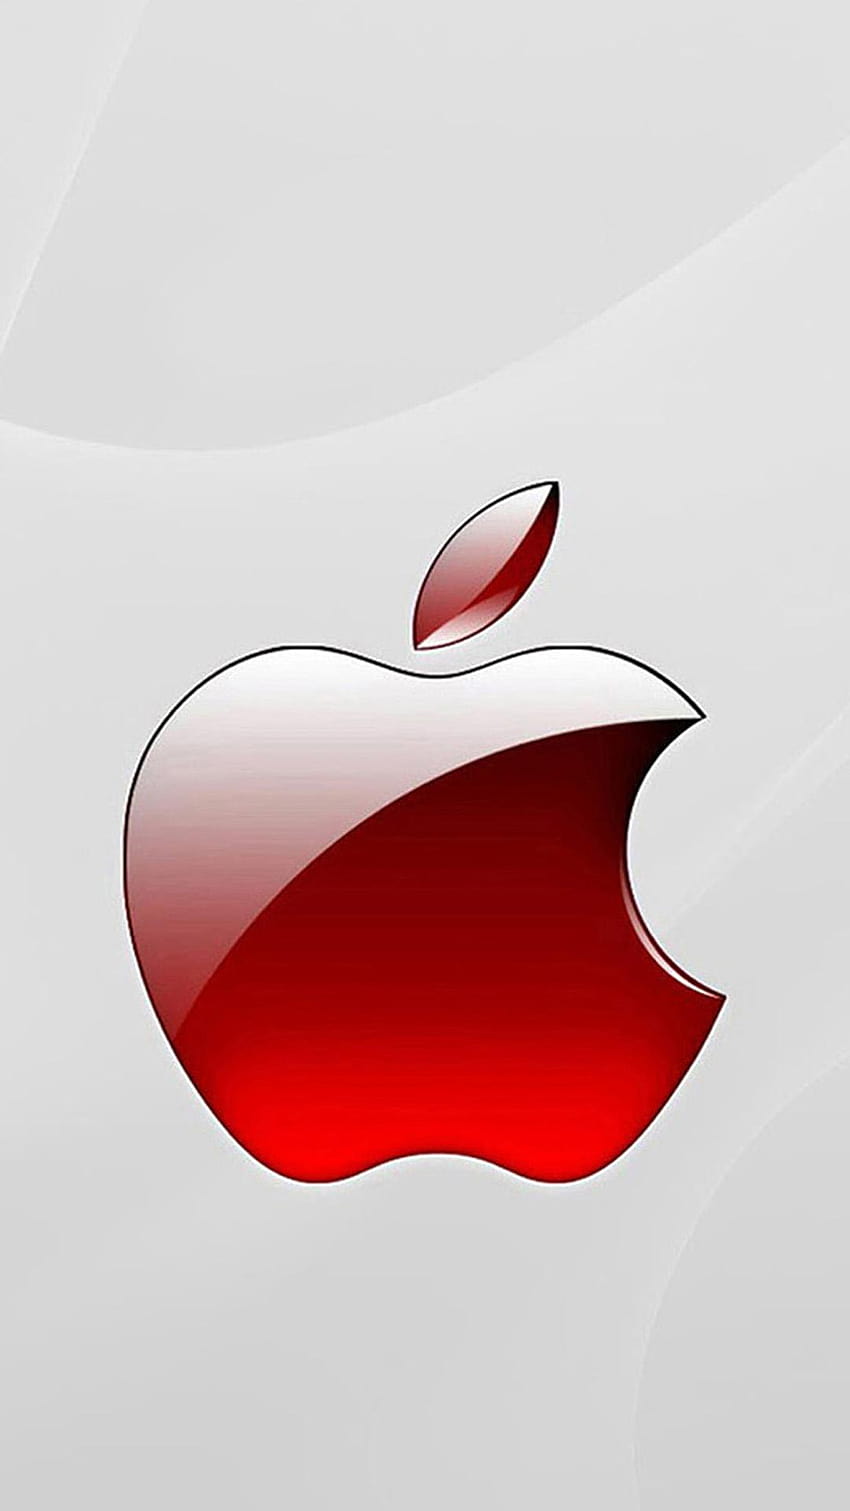 Red Apple LOGO 01 iPhone 6 and 6 plus, iphone logo red HD phone wallpaper